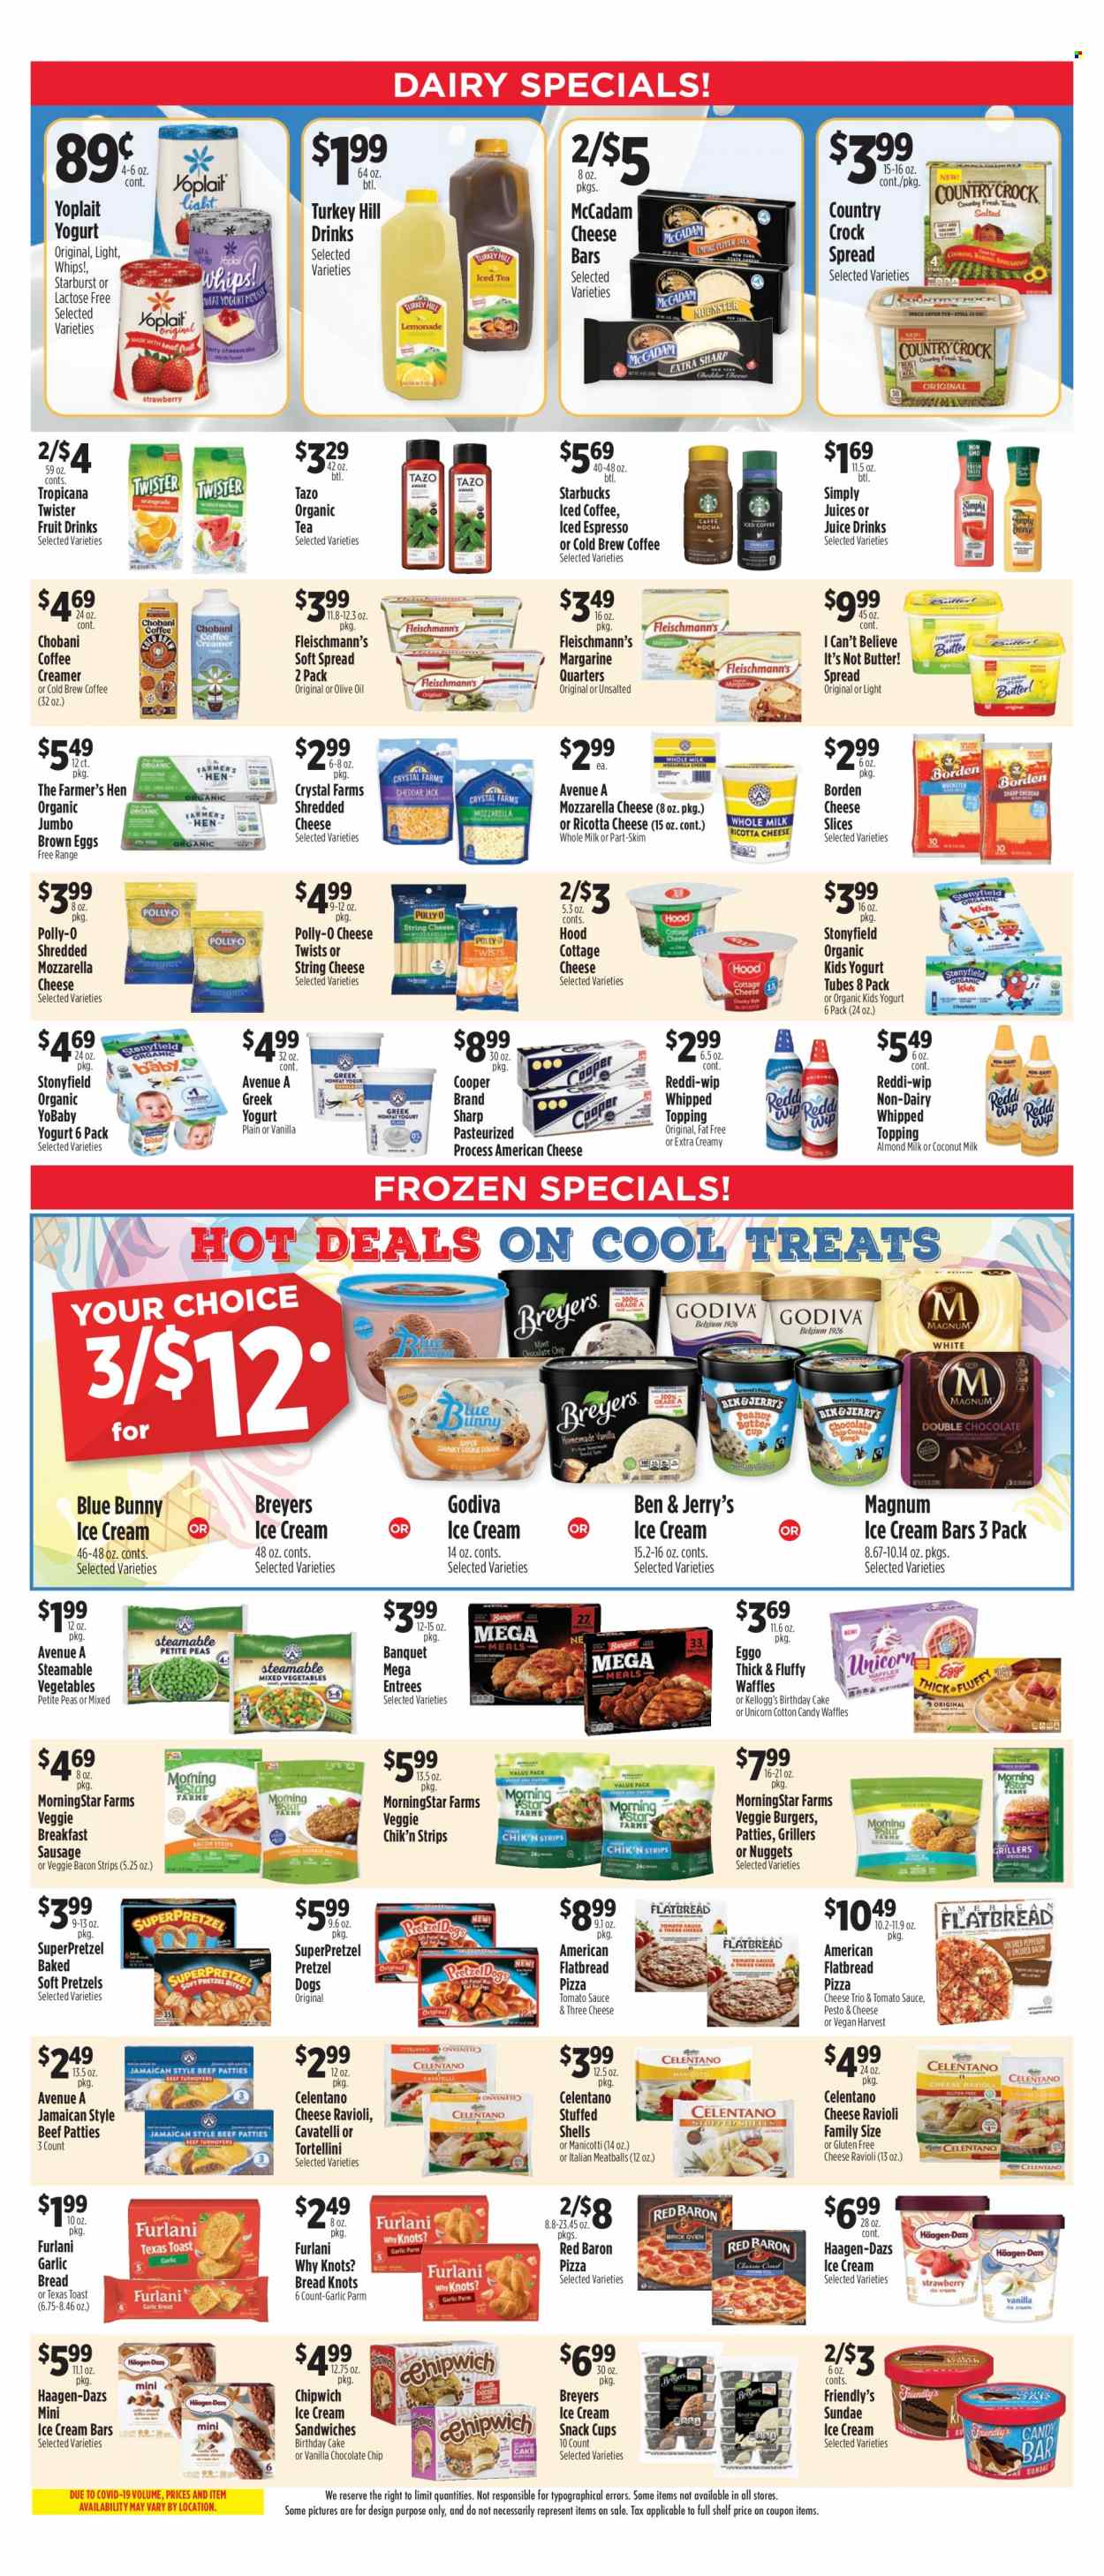 thumbnail - Pioneer Supermarkets Flyer - 09/25/2022 - 10/01/2022 - Sales products - bread, pretzels, cake, flatbread, waffles, peas, ravioli, pizza, meatballs, nuggets, tortellini, veggie burger, MorningStar Farms, bacon, sausage, american cheese, cottage cheese, ricotta, shredded cheese, sliced cheese, string cheese, greek yoghurt, yoghurt, Yoplait, Chobani, almond milk, eggs, butter, margarine, I Can't Believe It's Not Butter, creamer, Magnum, ice cream, ice cream bars, ice cream sandwich, Häagen-Dazs, Ben & Jerry's, Friendly's Ice Cream, Blue Bunny, strips, Red Baron, SuperPretzel, chocolate chips, snack, Godiva, cotton candy, Kellogg's, Starburst, topping, coconut milk, tomato sauce, pesto, olive oil, oil, juice, Tropicana Twister, iced coffee, tea, Starbucks. Page 4.